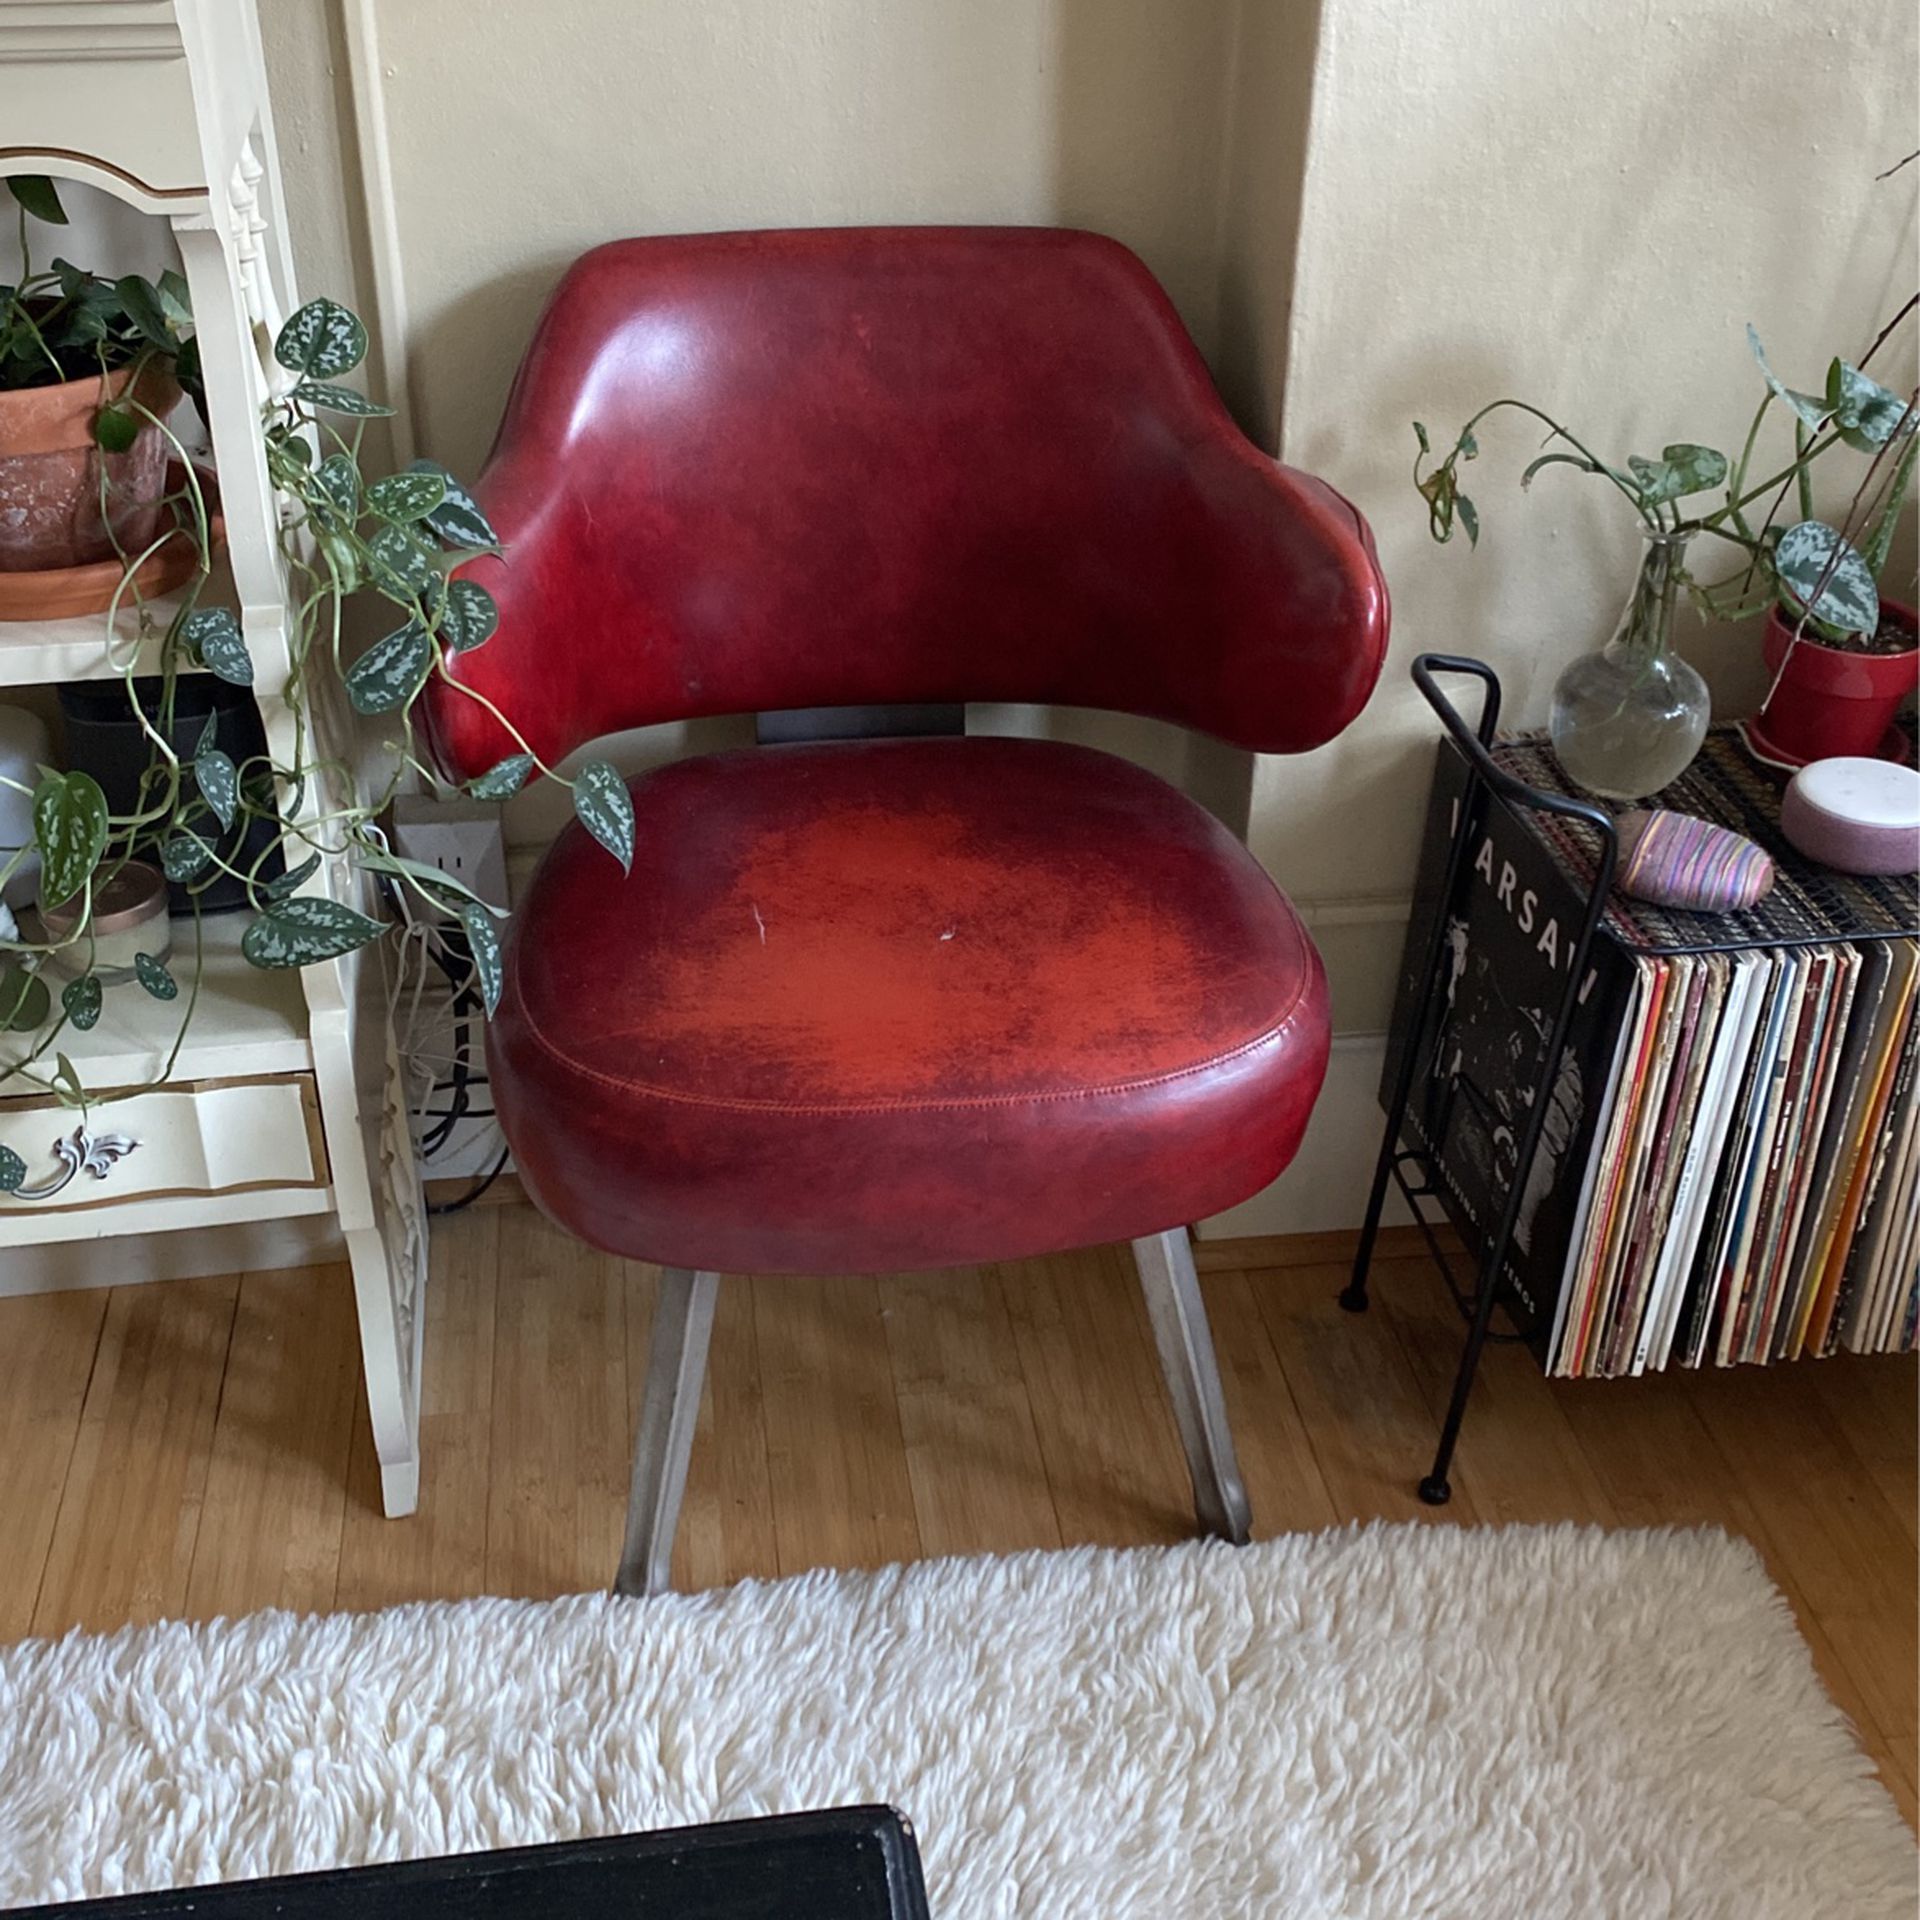 Little Red Leather Chair